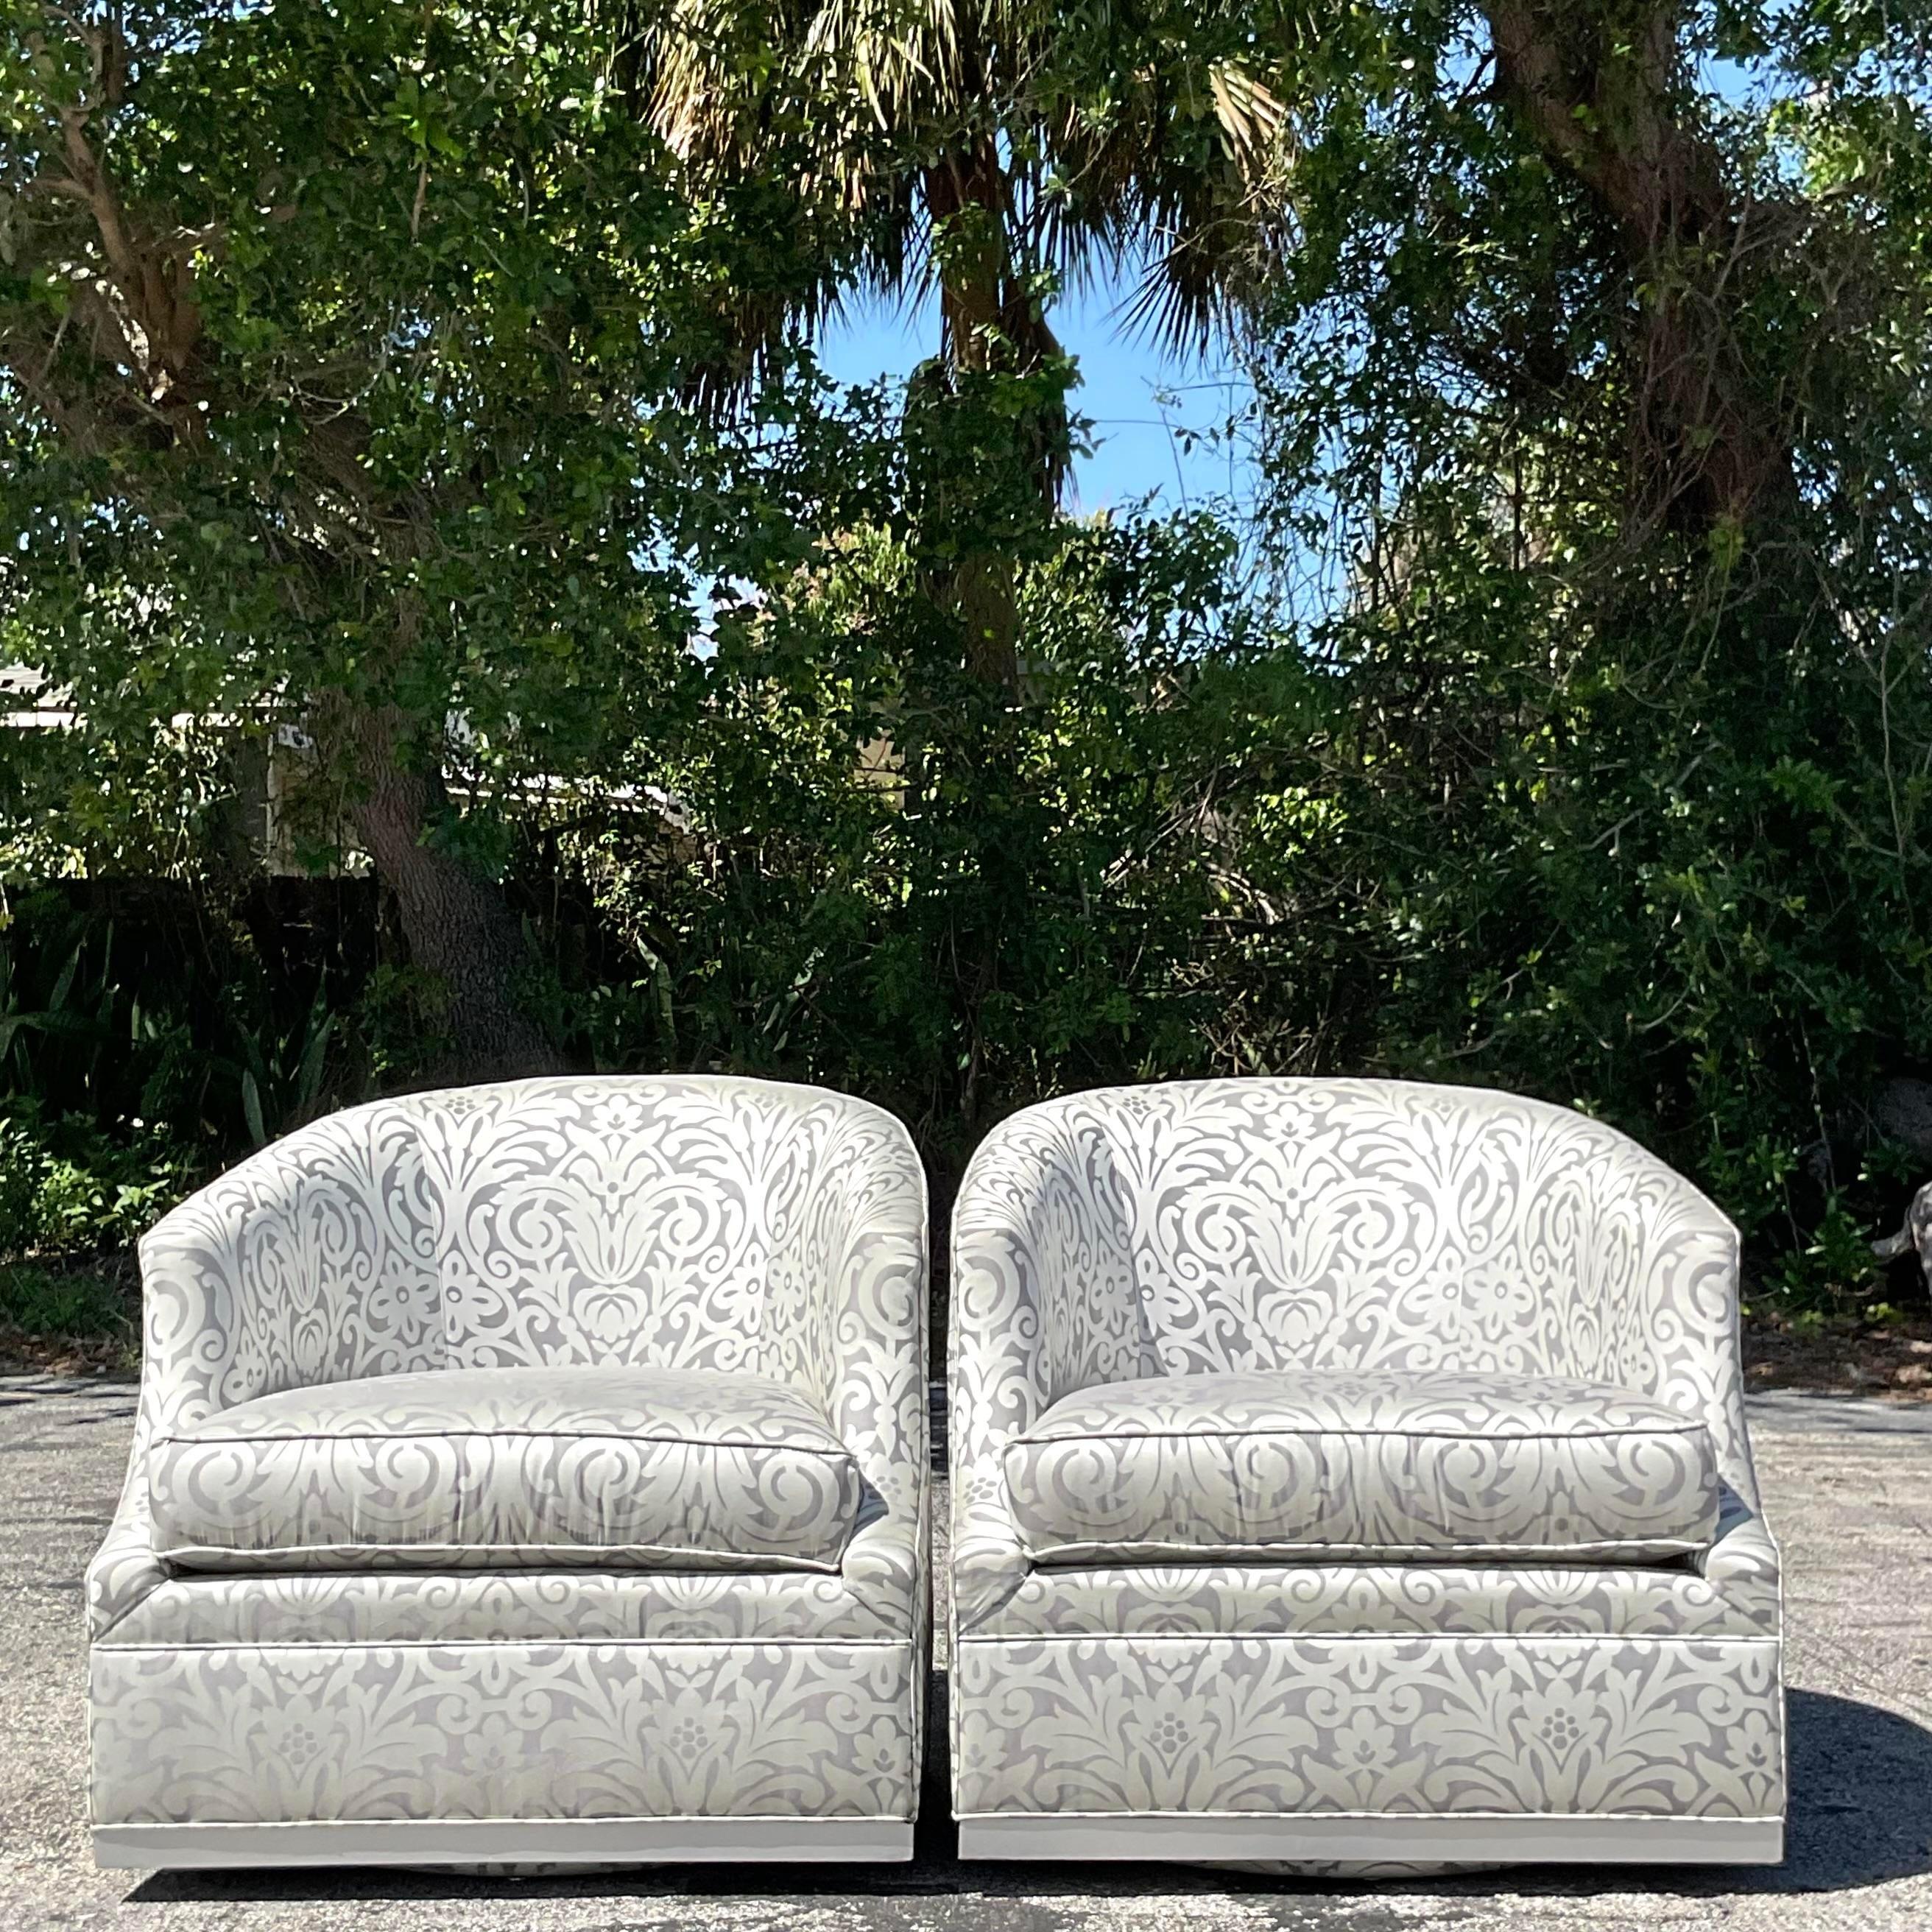 Transform your living space with our Vintage Boho Thomasville Metallic Jacquard Swivel Chairs, epitomizing the essence of American craftsmanship and style. Crafted with intricate metallic jacquard patterns, these chairs effortlessly blend vintage